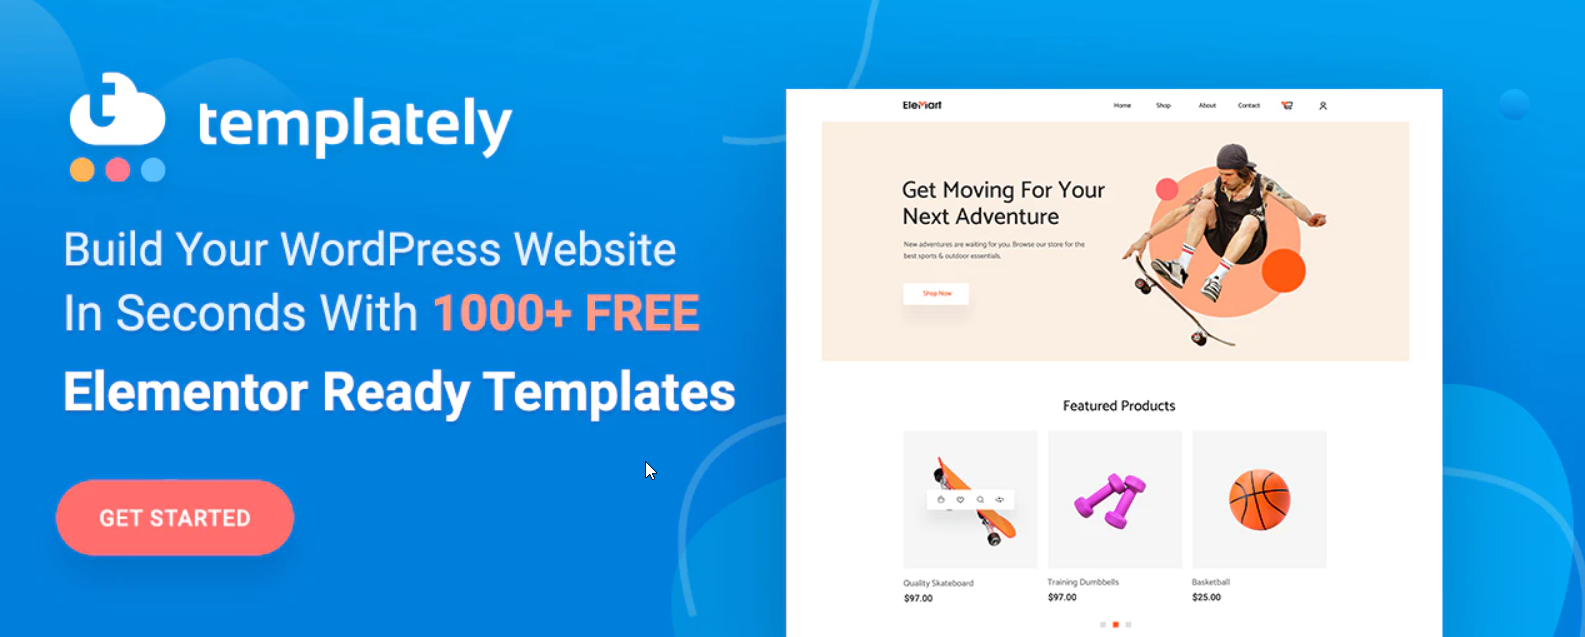 Best Ready Elementor Template Packs: April 2021 Edition 4